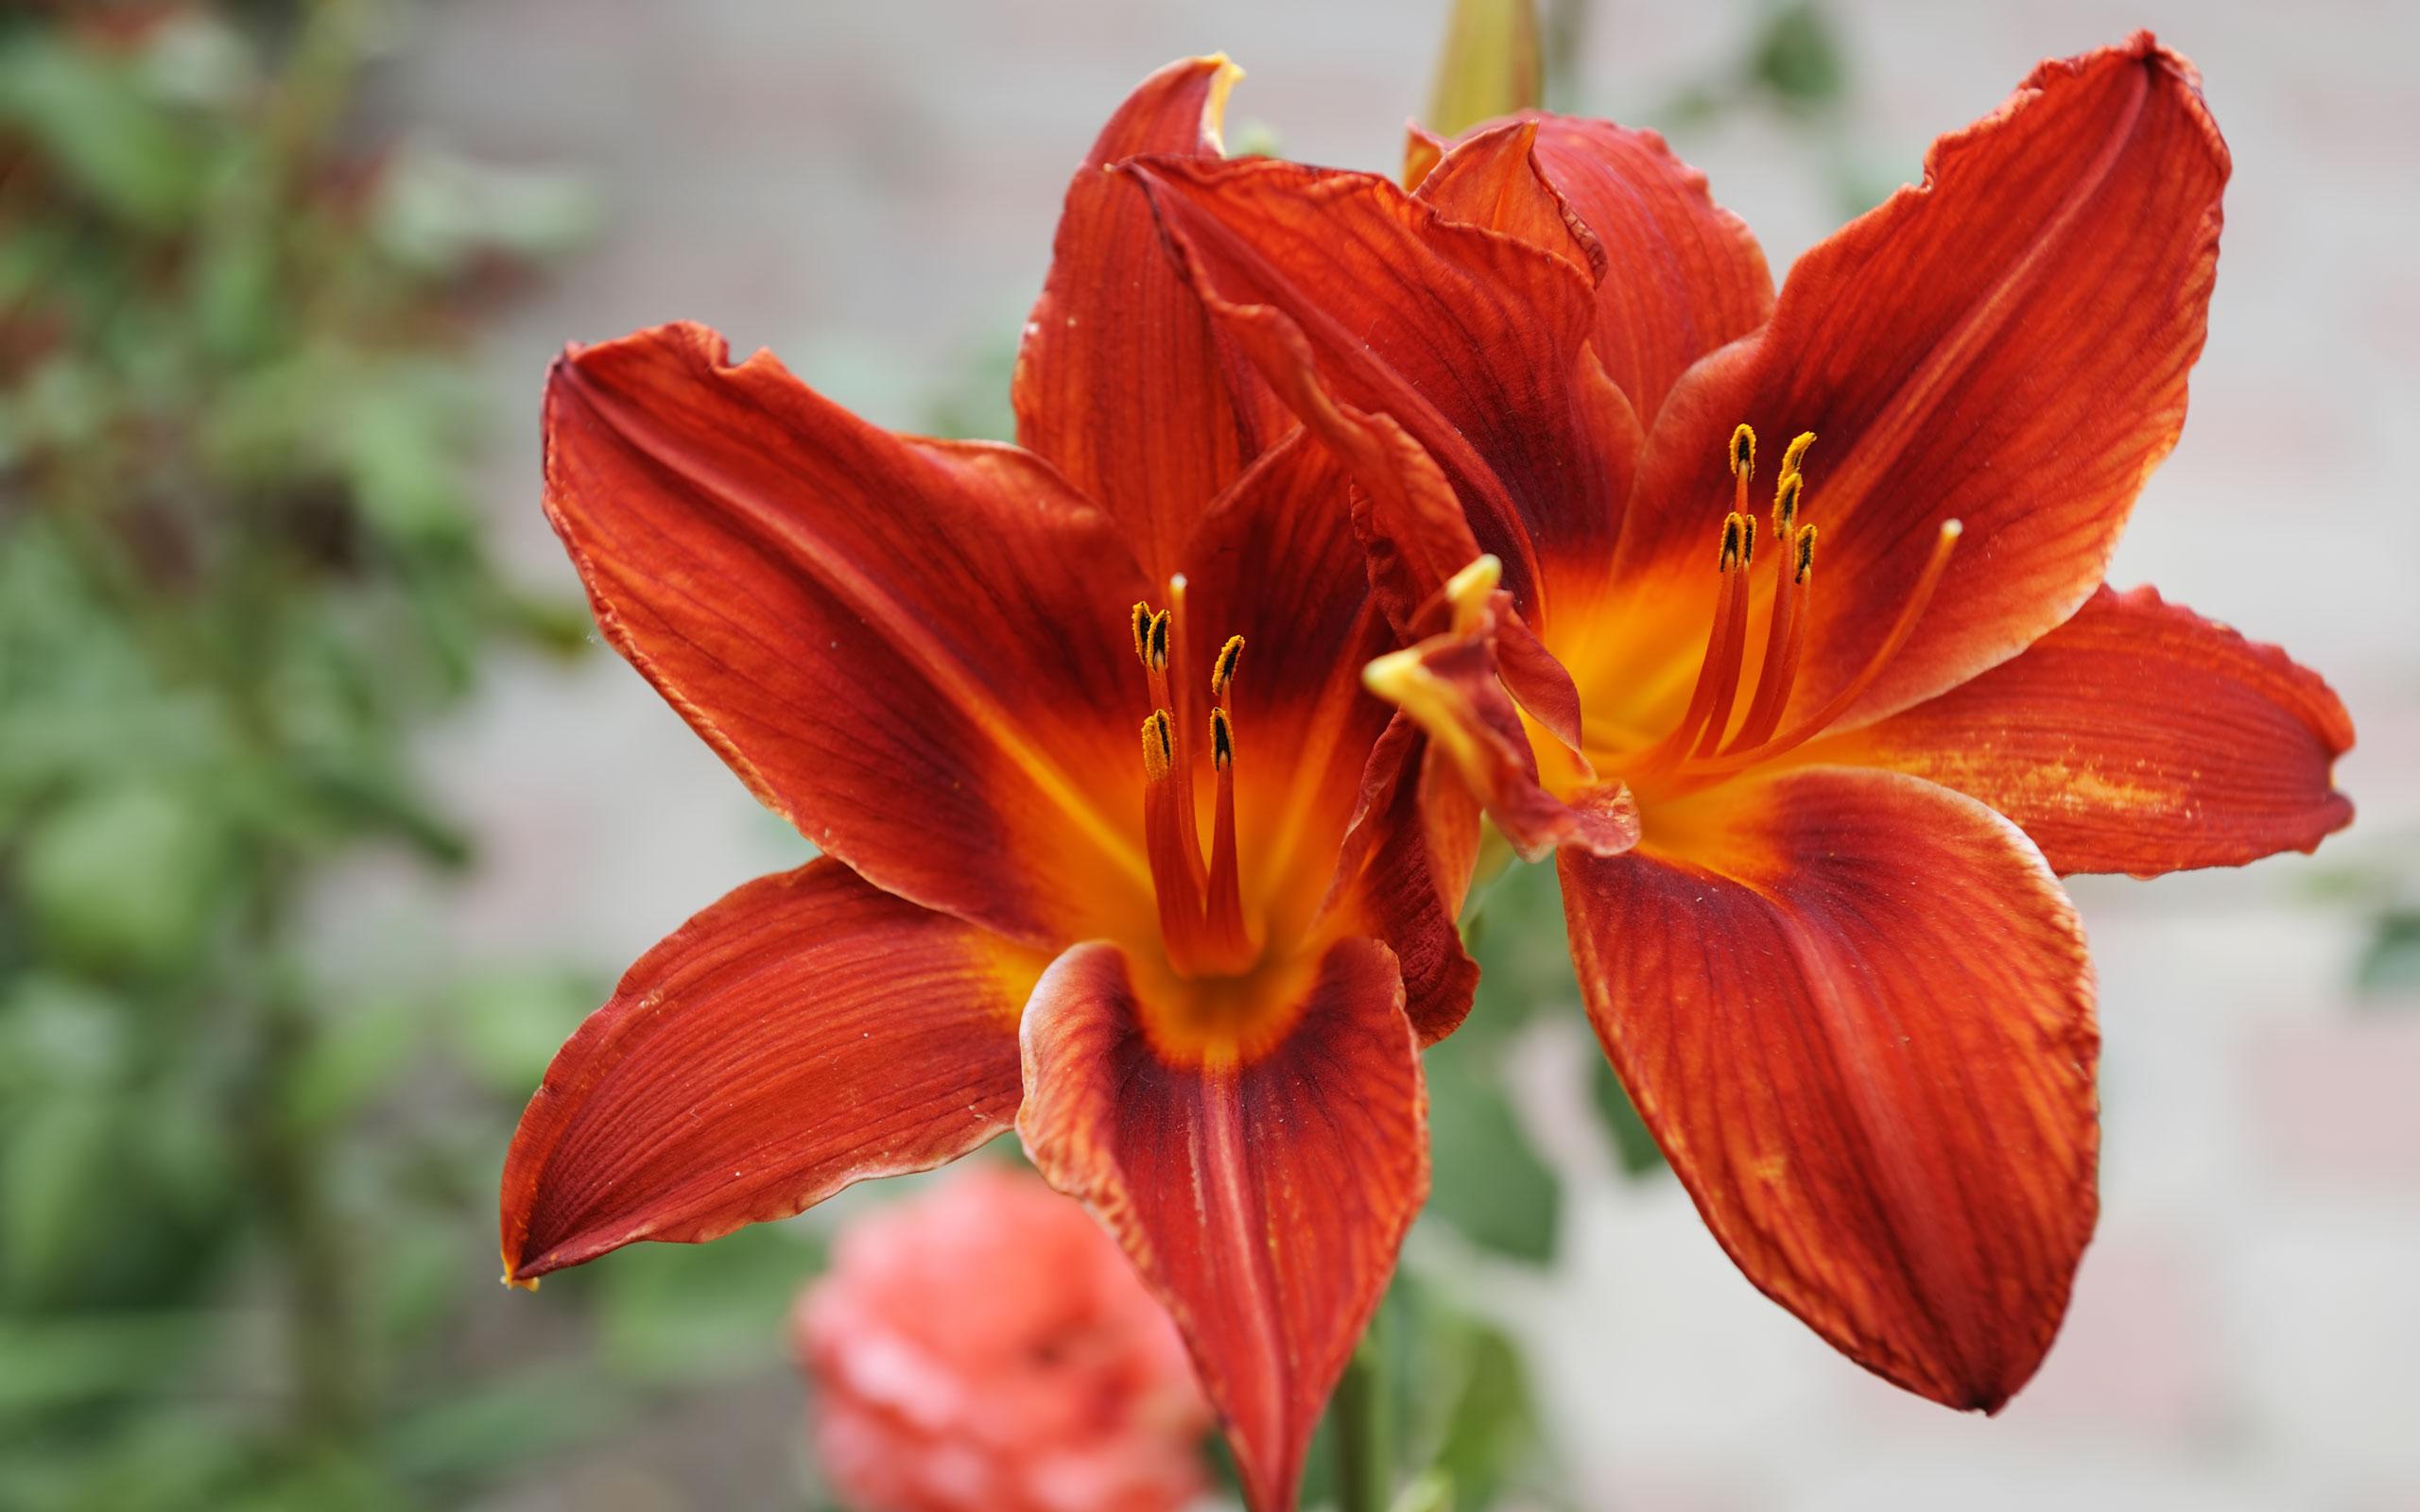 Lily Flowers Wallpaper HD 50638 2560x1600px